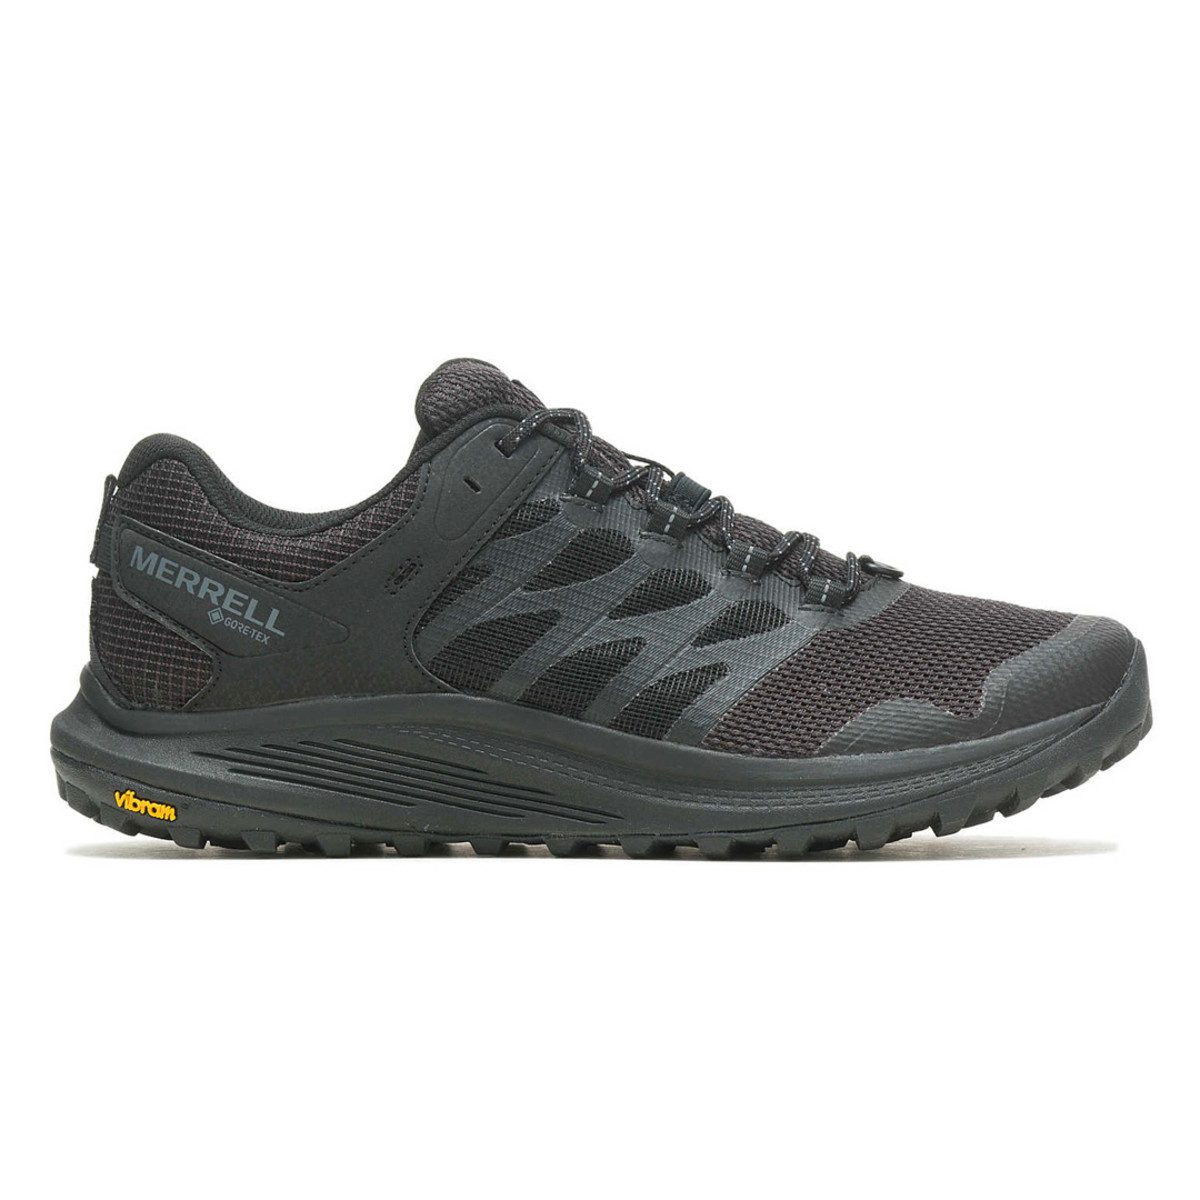 The Merrell Nova 3 GORE-TEX is on sale right now at Merrell